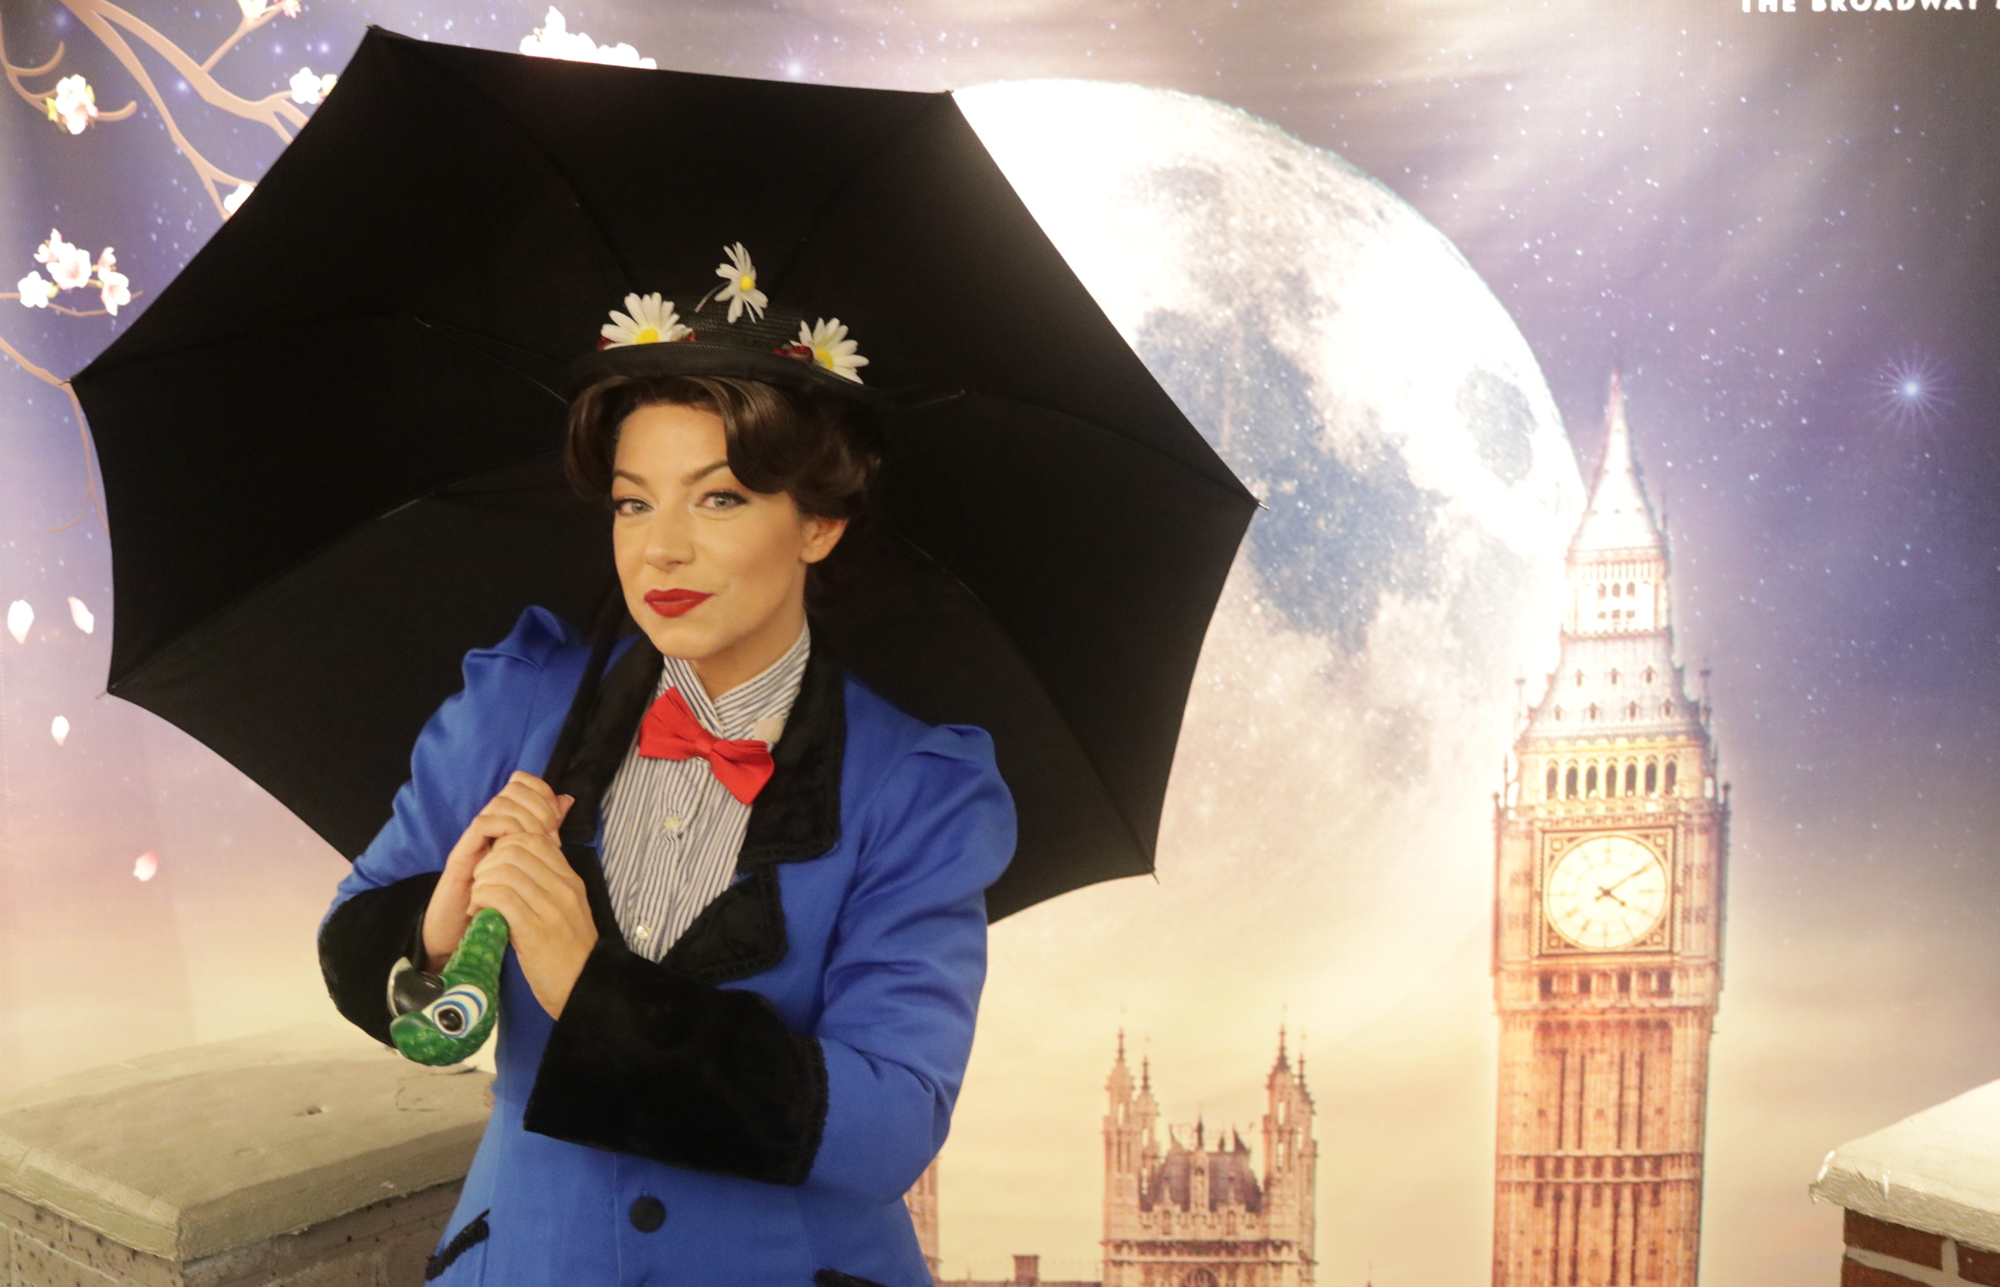 Shannon Starkey stars as Mary Poppins in St. Luke’s United Methodist Church’s production of “Mary Poppins: The Broadway Musical.”